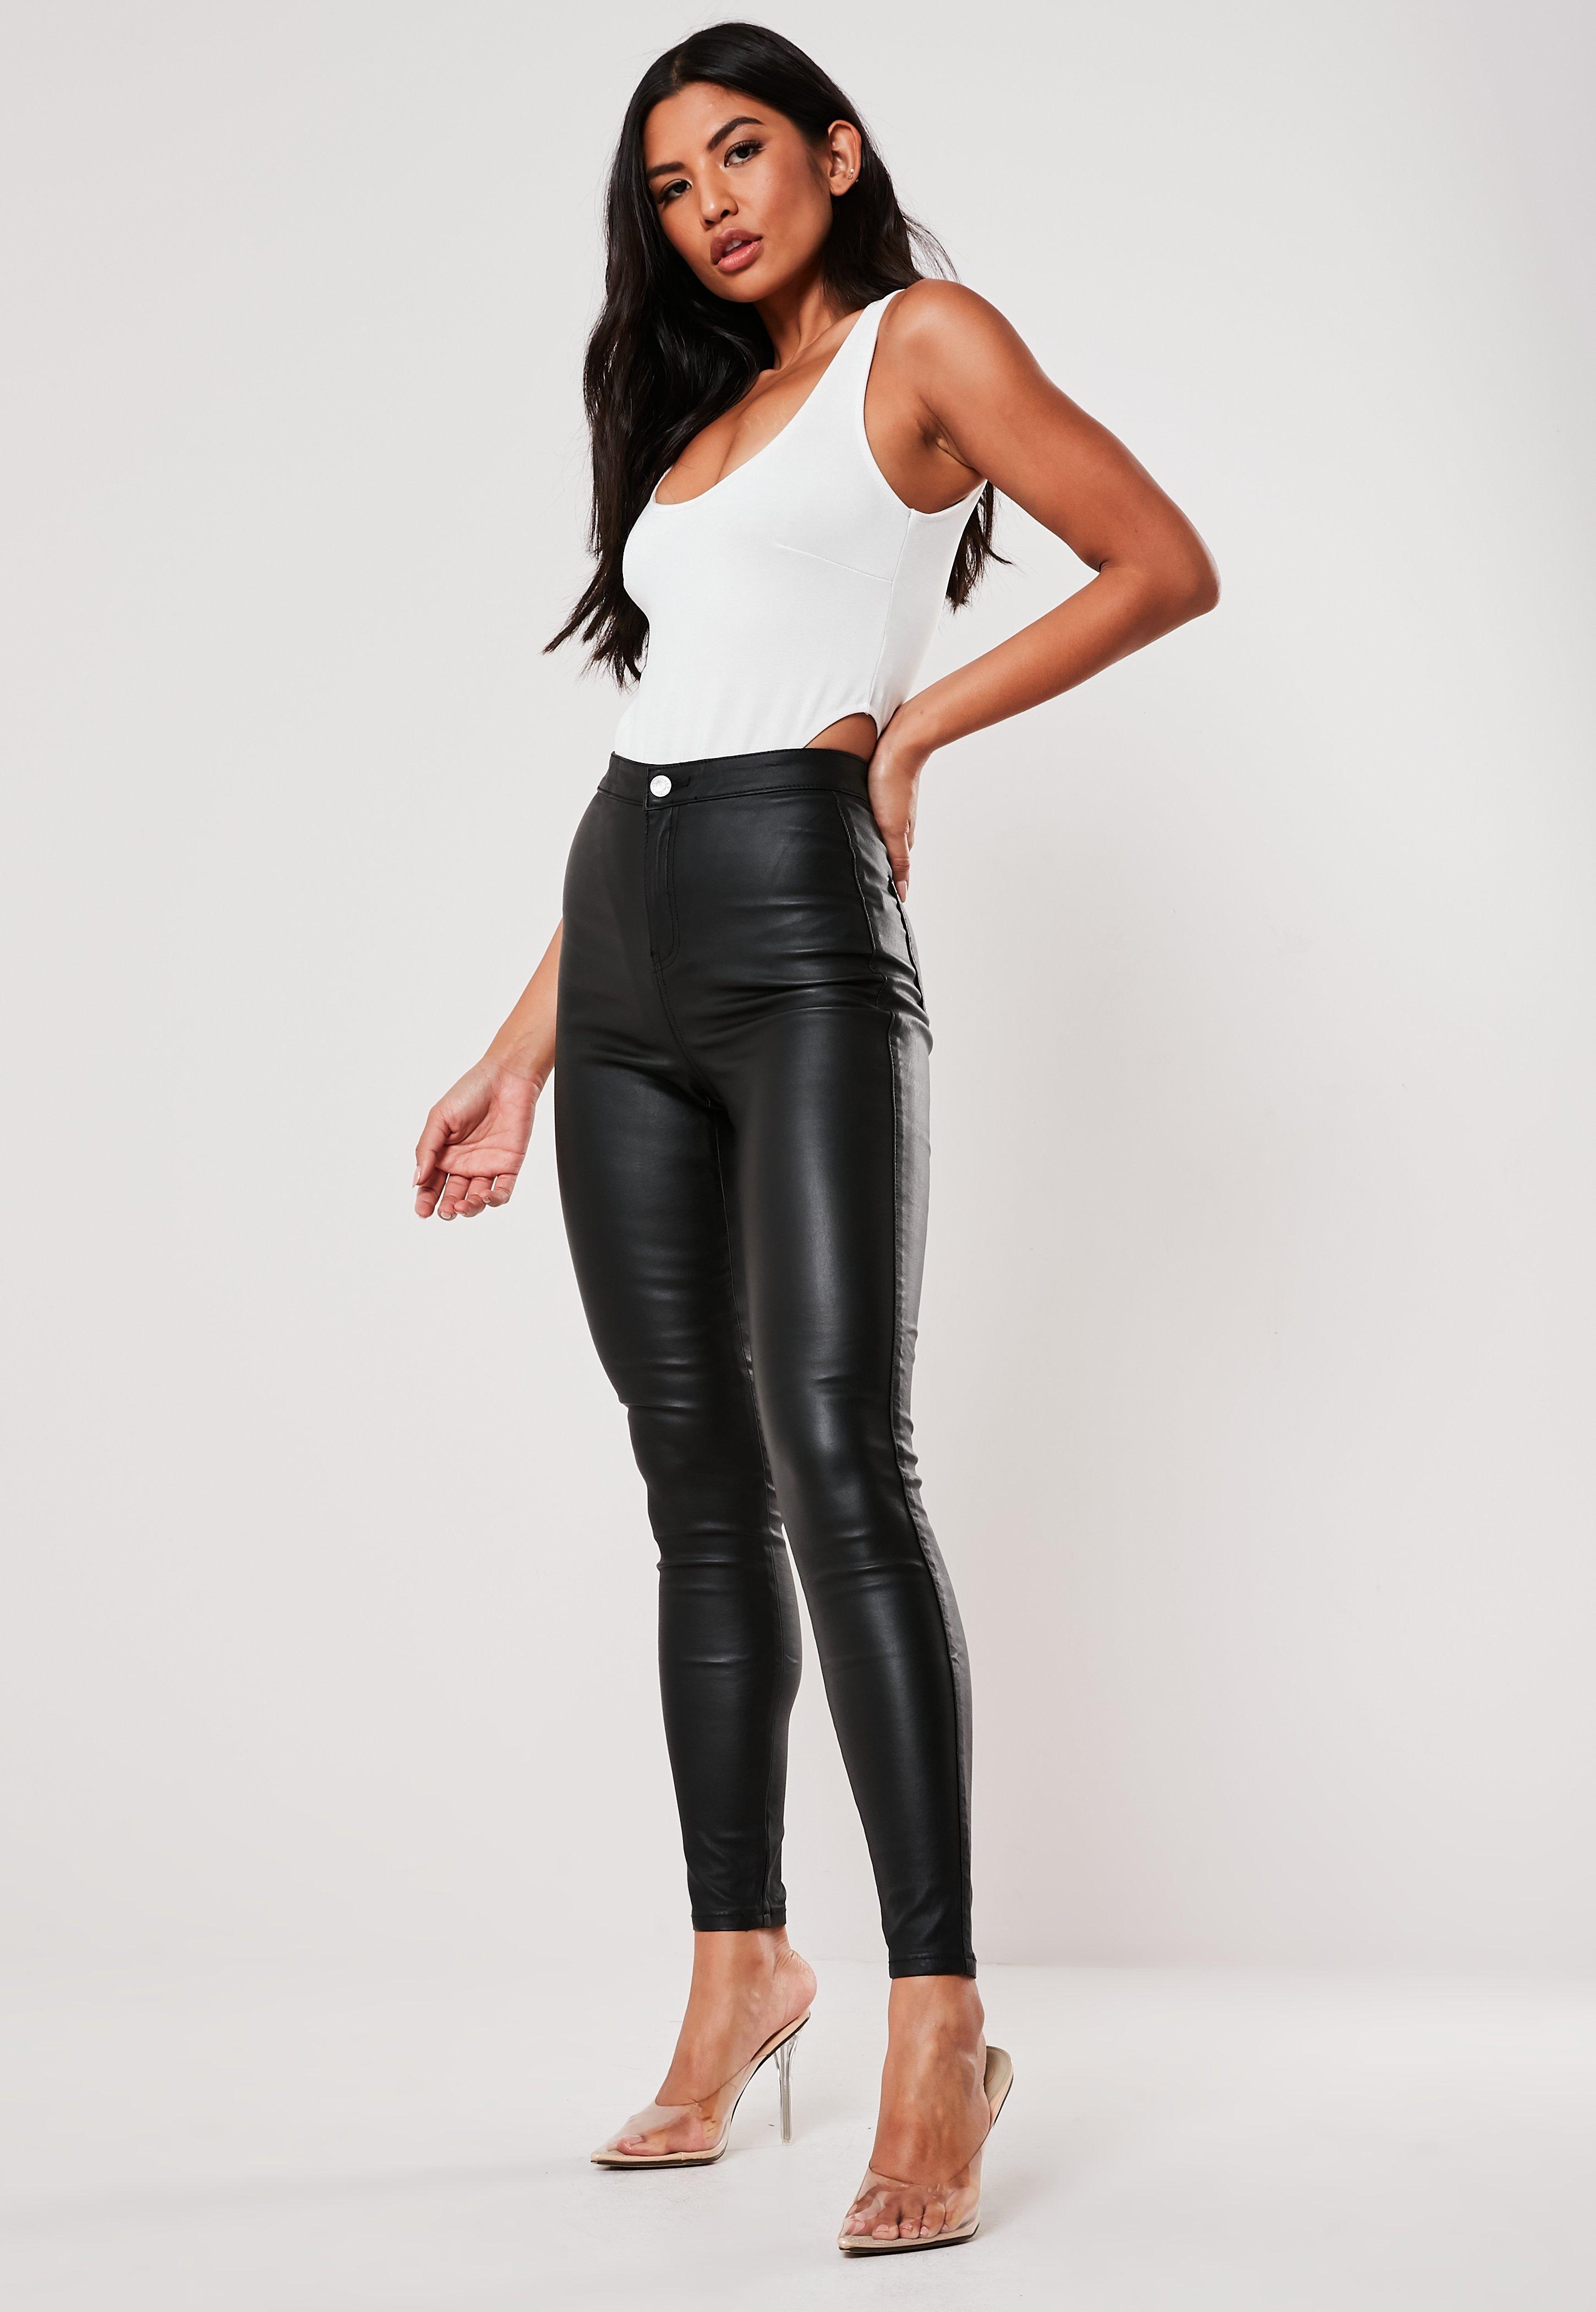 Missguided Denim Petite Black High Waisted Coated Skinny Jeans - Lyst